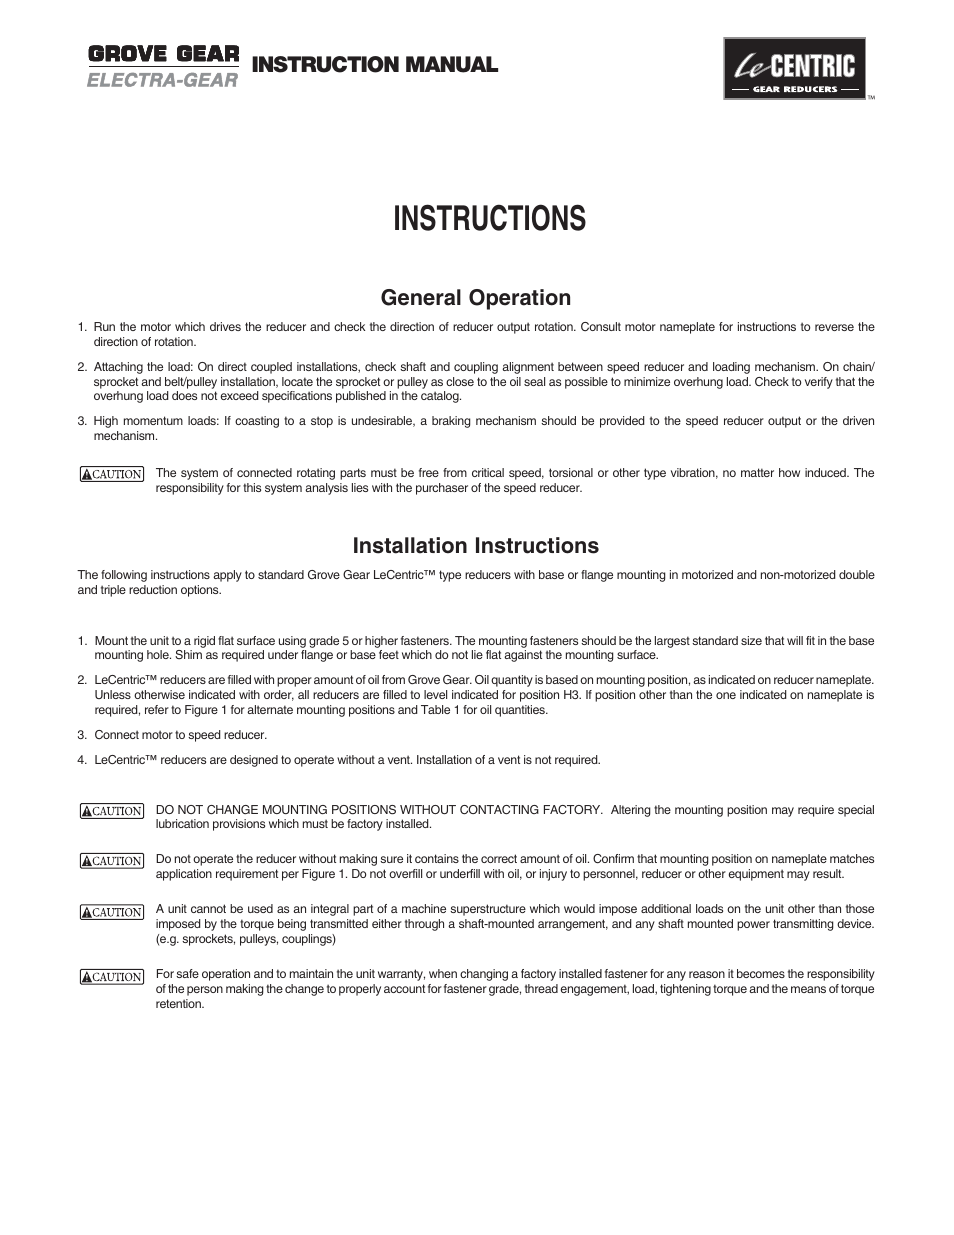 Instructions, Instruction manual general operation, Installation instructions | Grove Gear Helical-Inline Aluminum (P Series) User Manual | Page 3 / 6